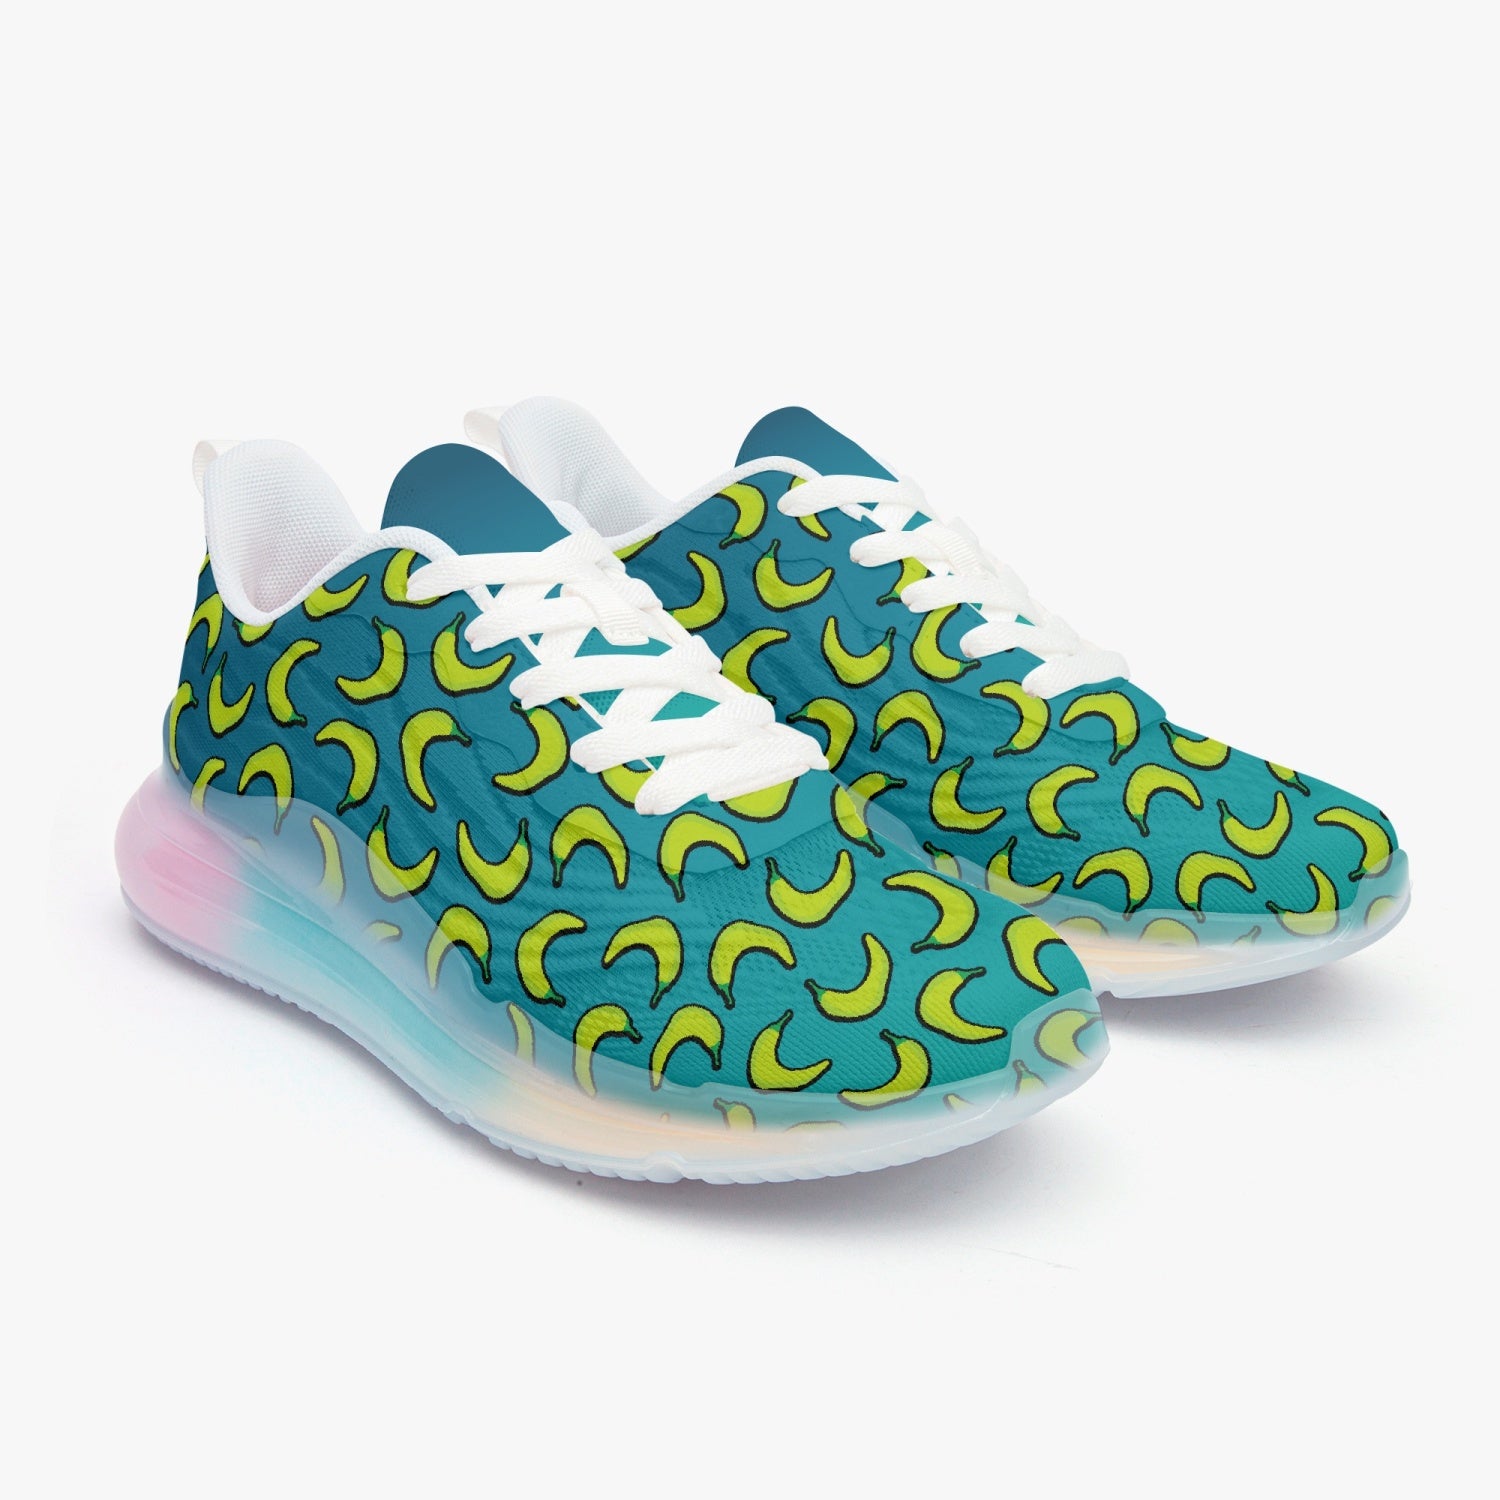 Weirdo | These awesome sneakers for women are lightweight and are made to spice up your feet! These blueish sneakers have green peppers printed on them.